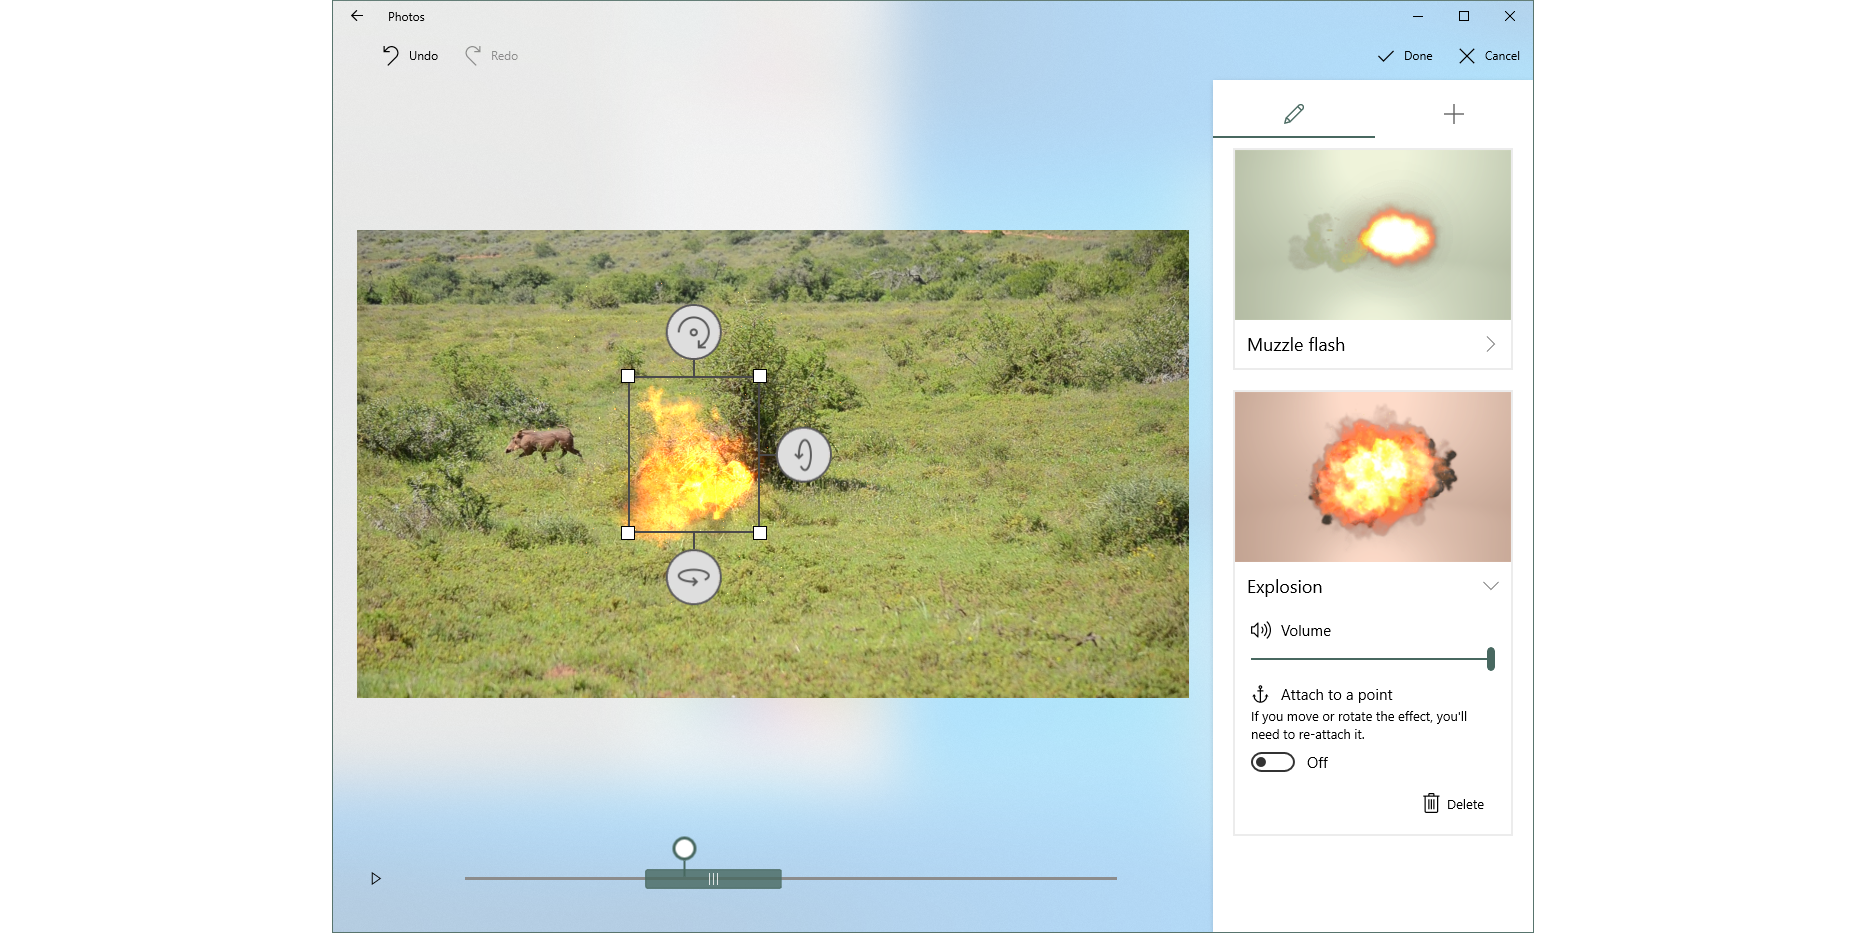 Windows 10 photo editing feature with explosion effect options.